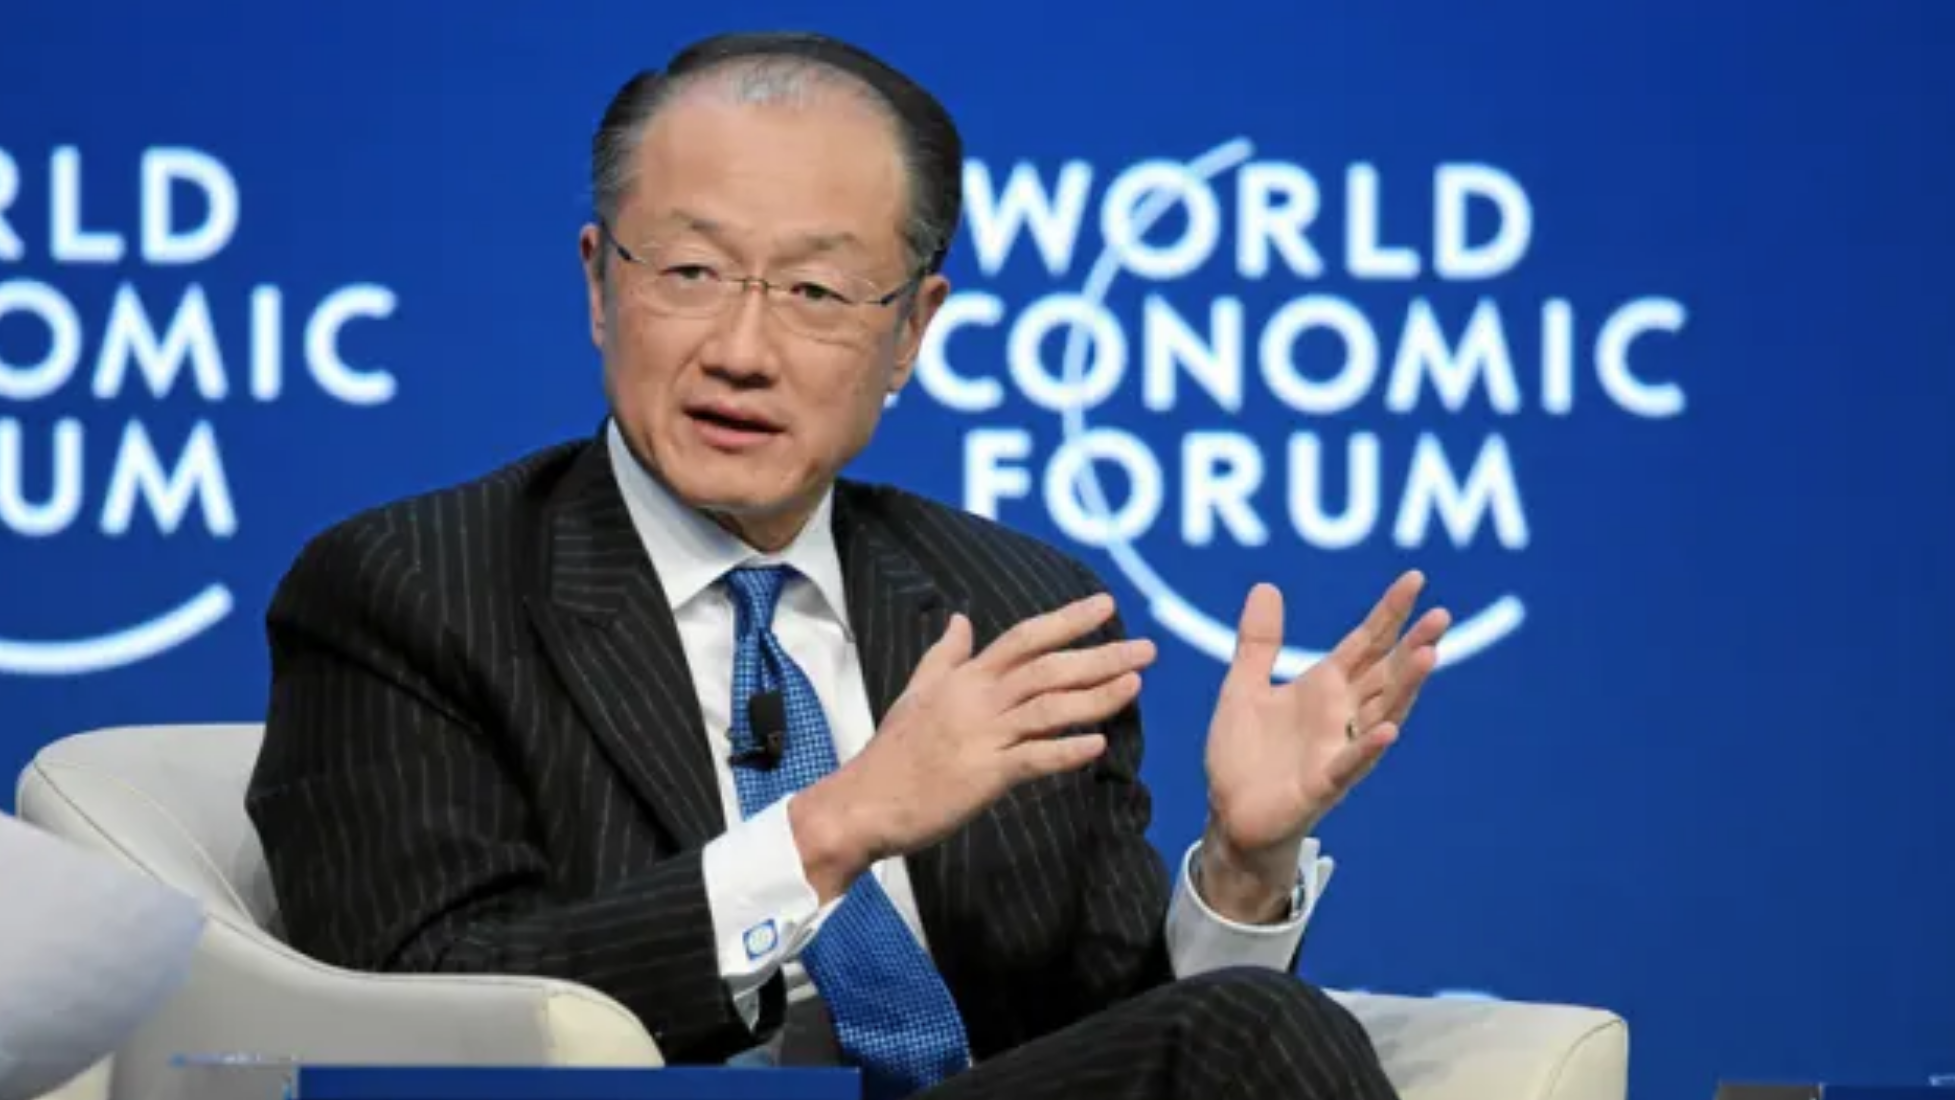 Jim Kim, as World Bank Group President, speaking at the World Economic Forum in Davos - From Devex article